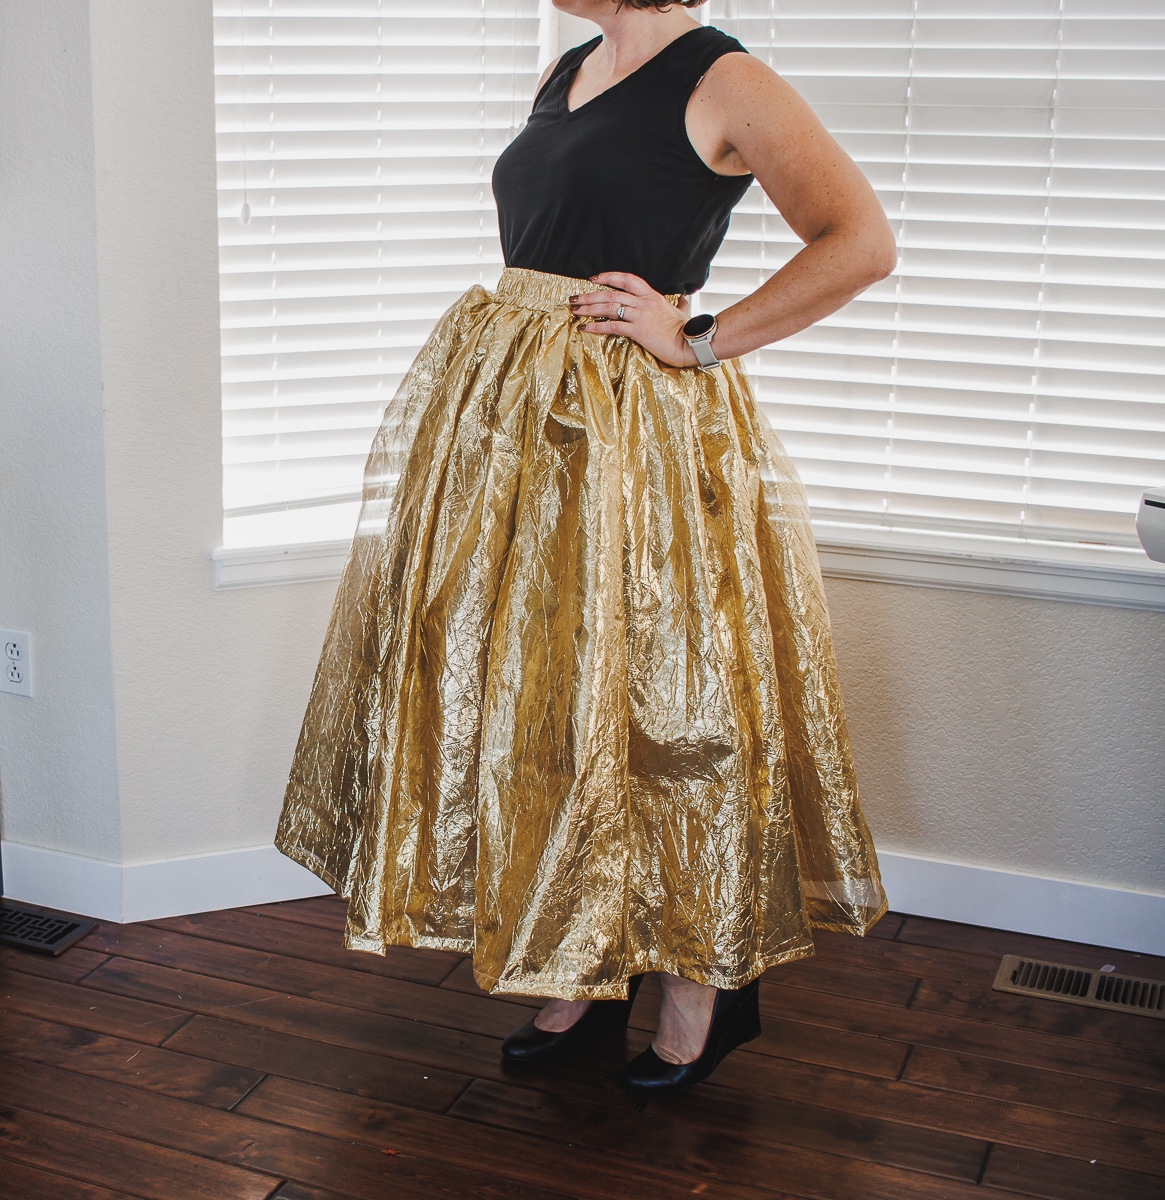 How to sew a fancy party skirt with pockets